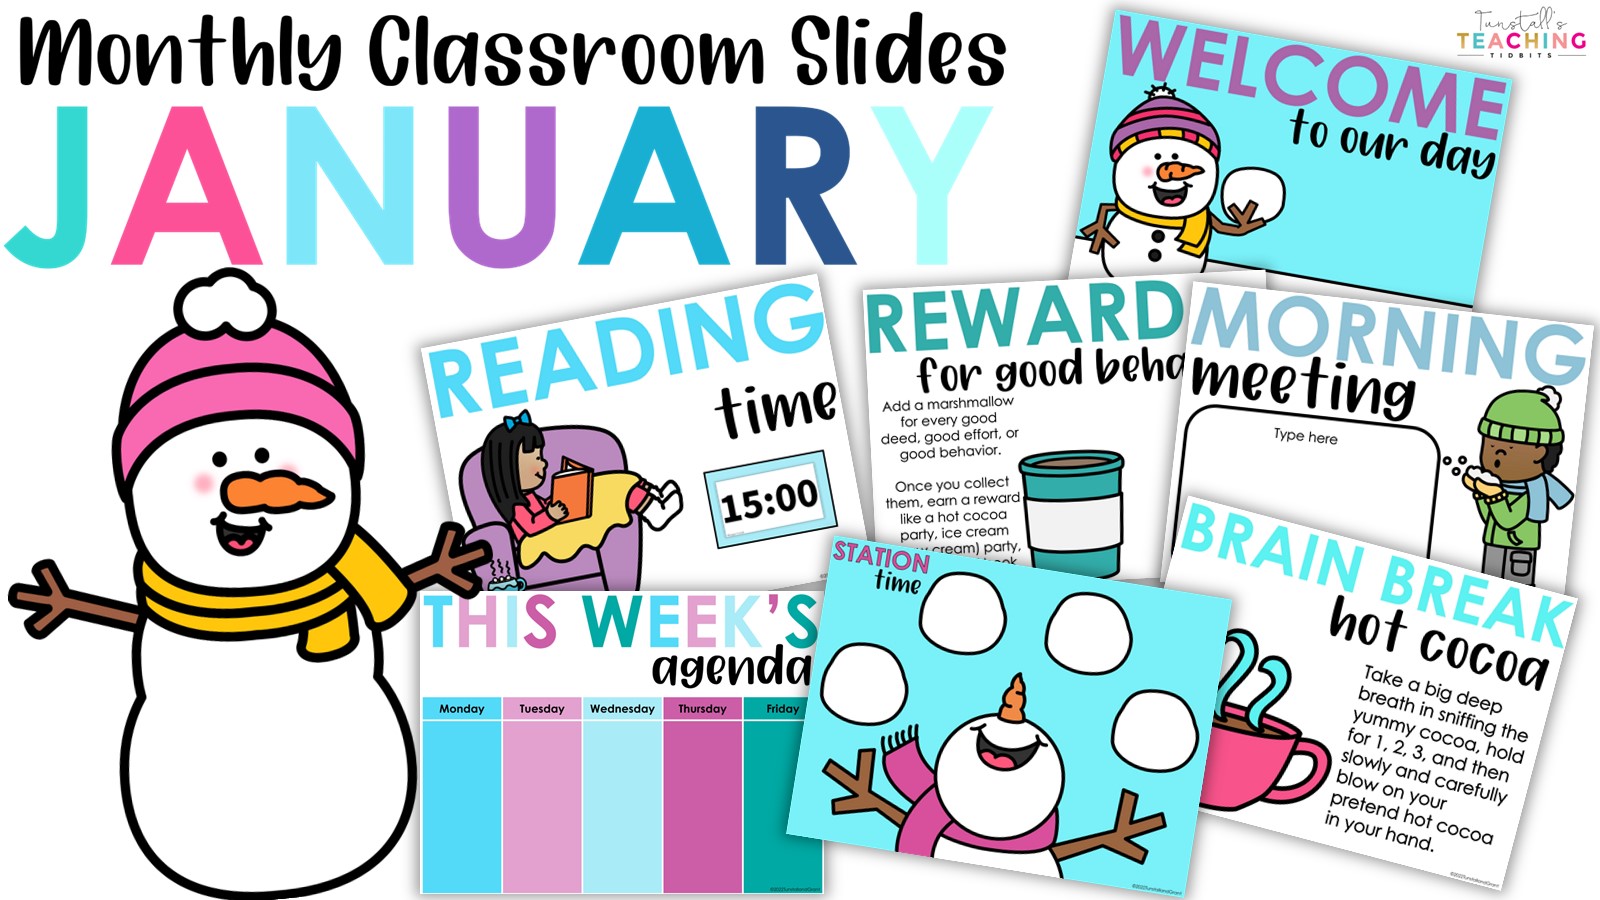 Monthly Classroom Slides